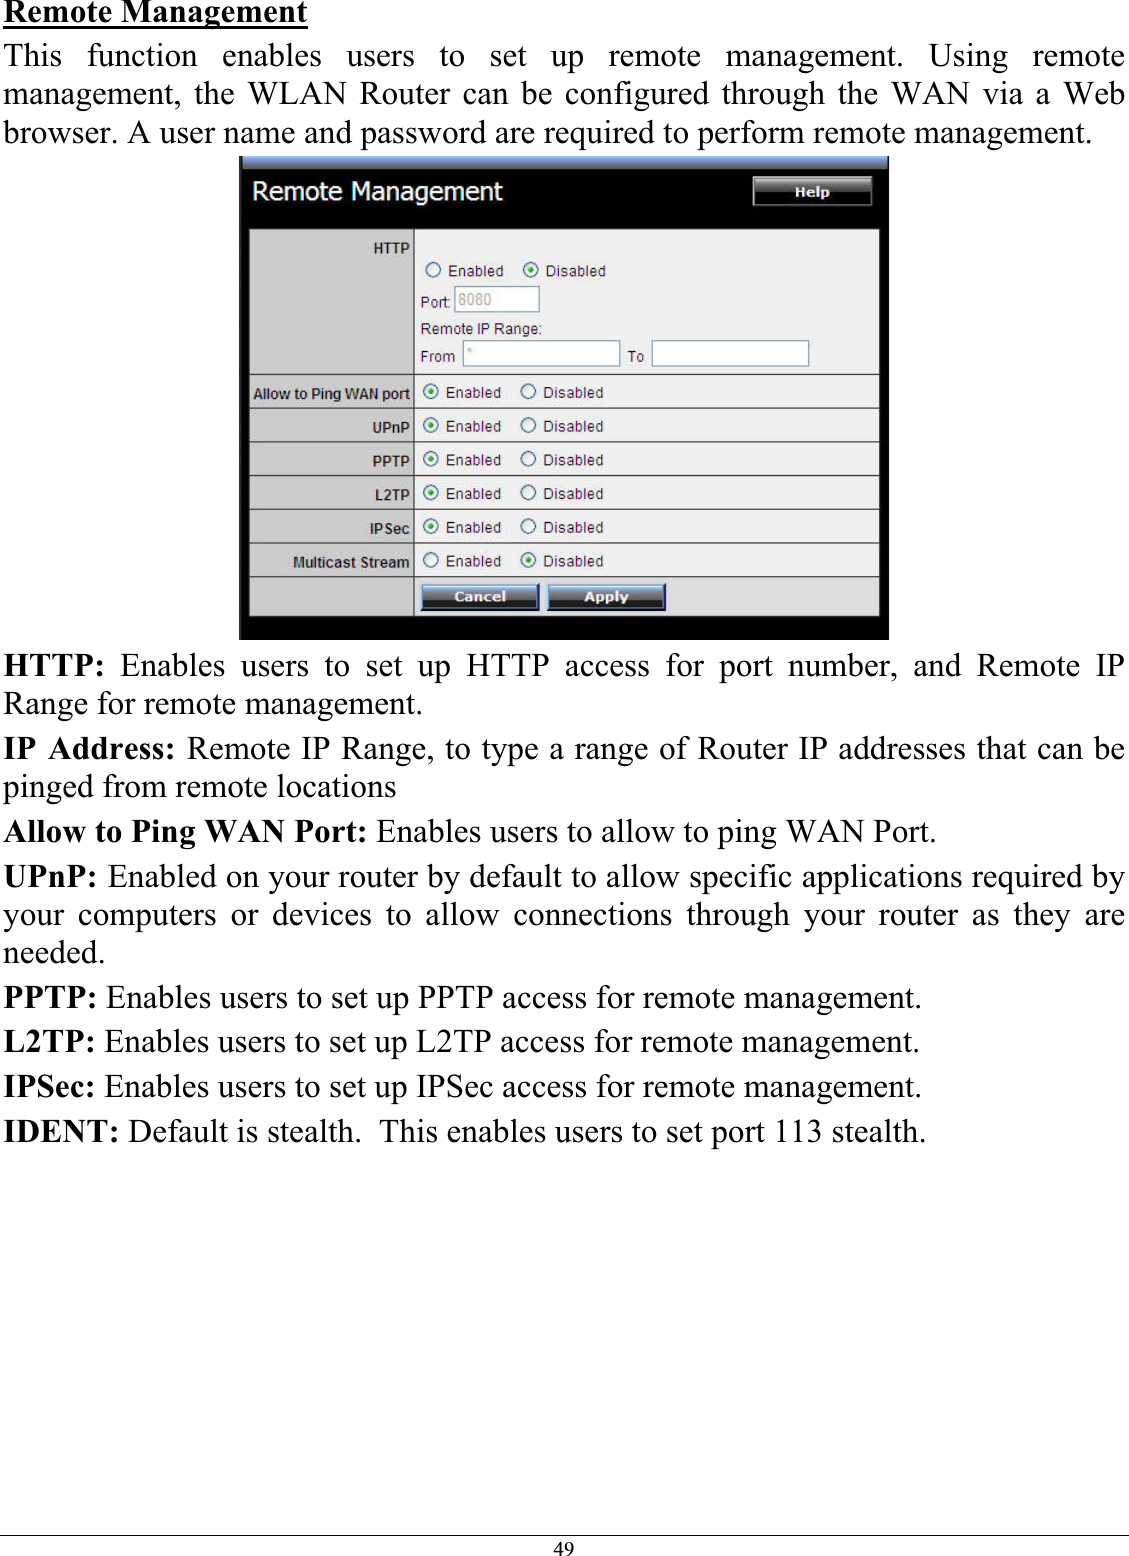 49Remote ManagementThis function enables users to set up remote management. Using remote management, the WLAN Router can be configured through the WAN via a Web browser. A user name and password are required to perform remote management. HTTP: Enables users to set up HTTP access for port number, and Remote IP Range for remote management. IP Address: Remote IP Range, to type a range of Router IP addresses that can be pinged from remote locations Allow to Ping WAN Port: Enables users to allow to ping WAN Port.UPnP: Enabled on your router by default to allow specific applications required by your computers or devices to allow connections through your router as they are needed.PPTP: Enables users to set up PPTP access for remote management. L2TP: Enables users to set up L2TP access for remote management. IPSec: Enables users to set up IPSec access for remote management. IDENT: Default is stealth.  This enables users to set port 113 stealth. 